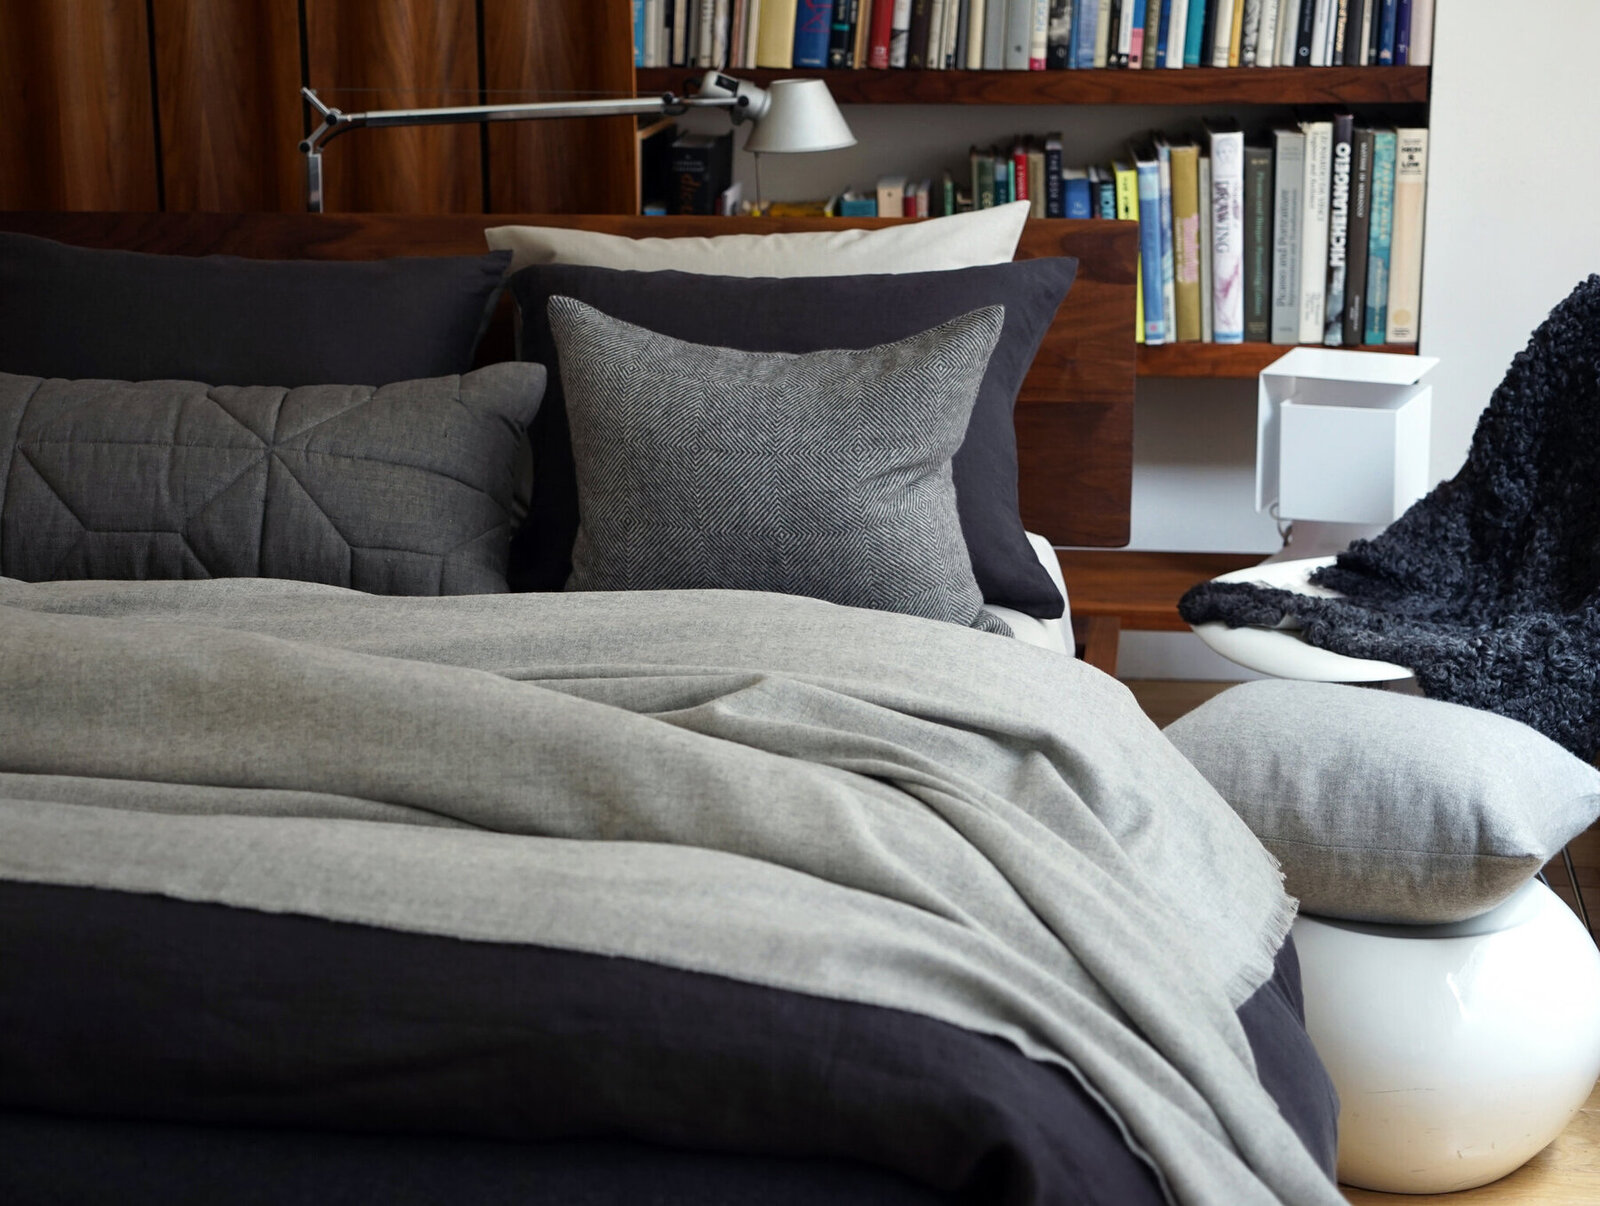 Bedding Mistakes: How To Avoid These 7 Bedding Blunders